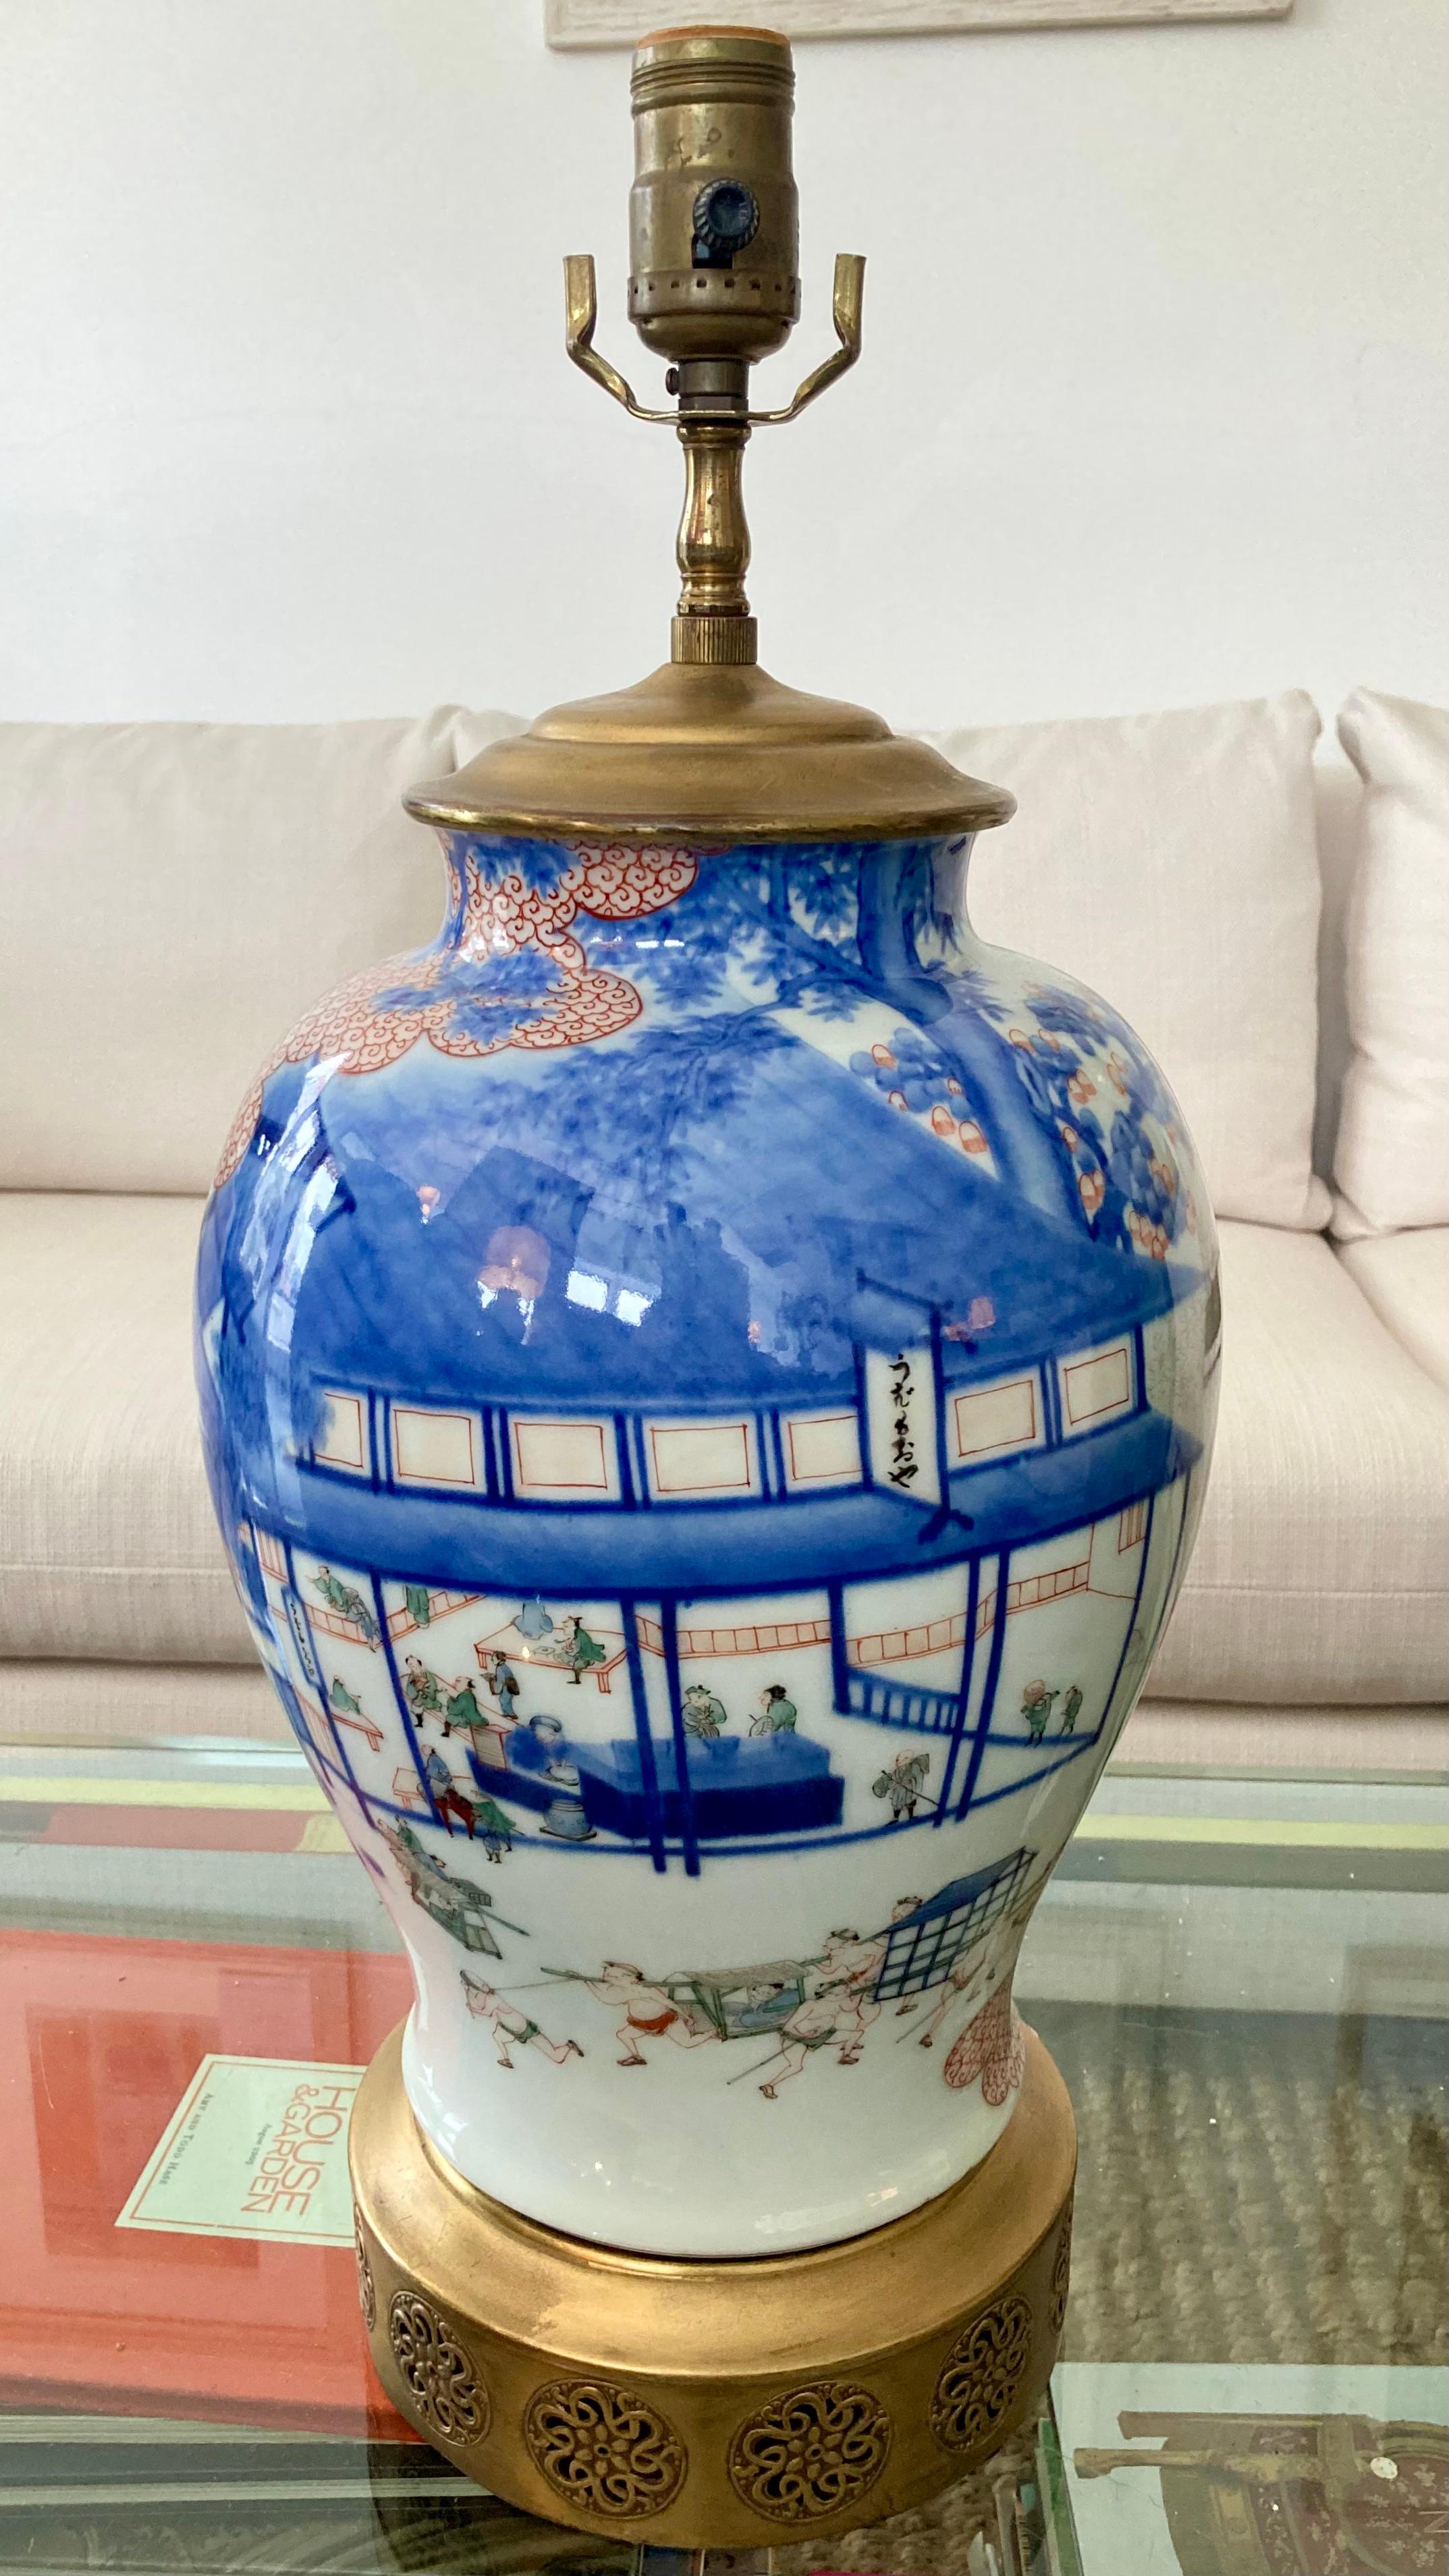 Beautiful Asian porcelain table lamp. Beautiful hand painted landscape scene with gorgeous colors and details. Just add your favorite shade style.